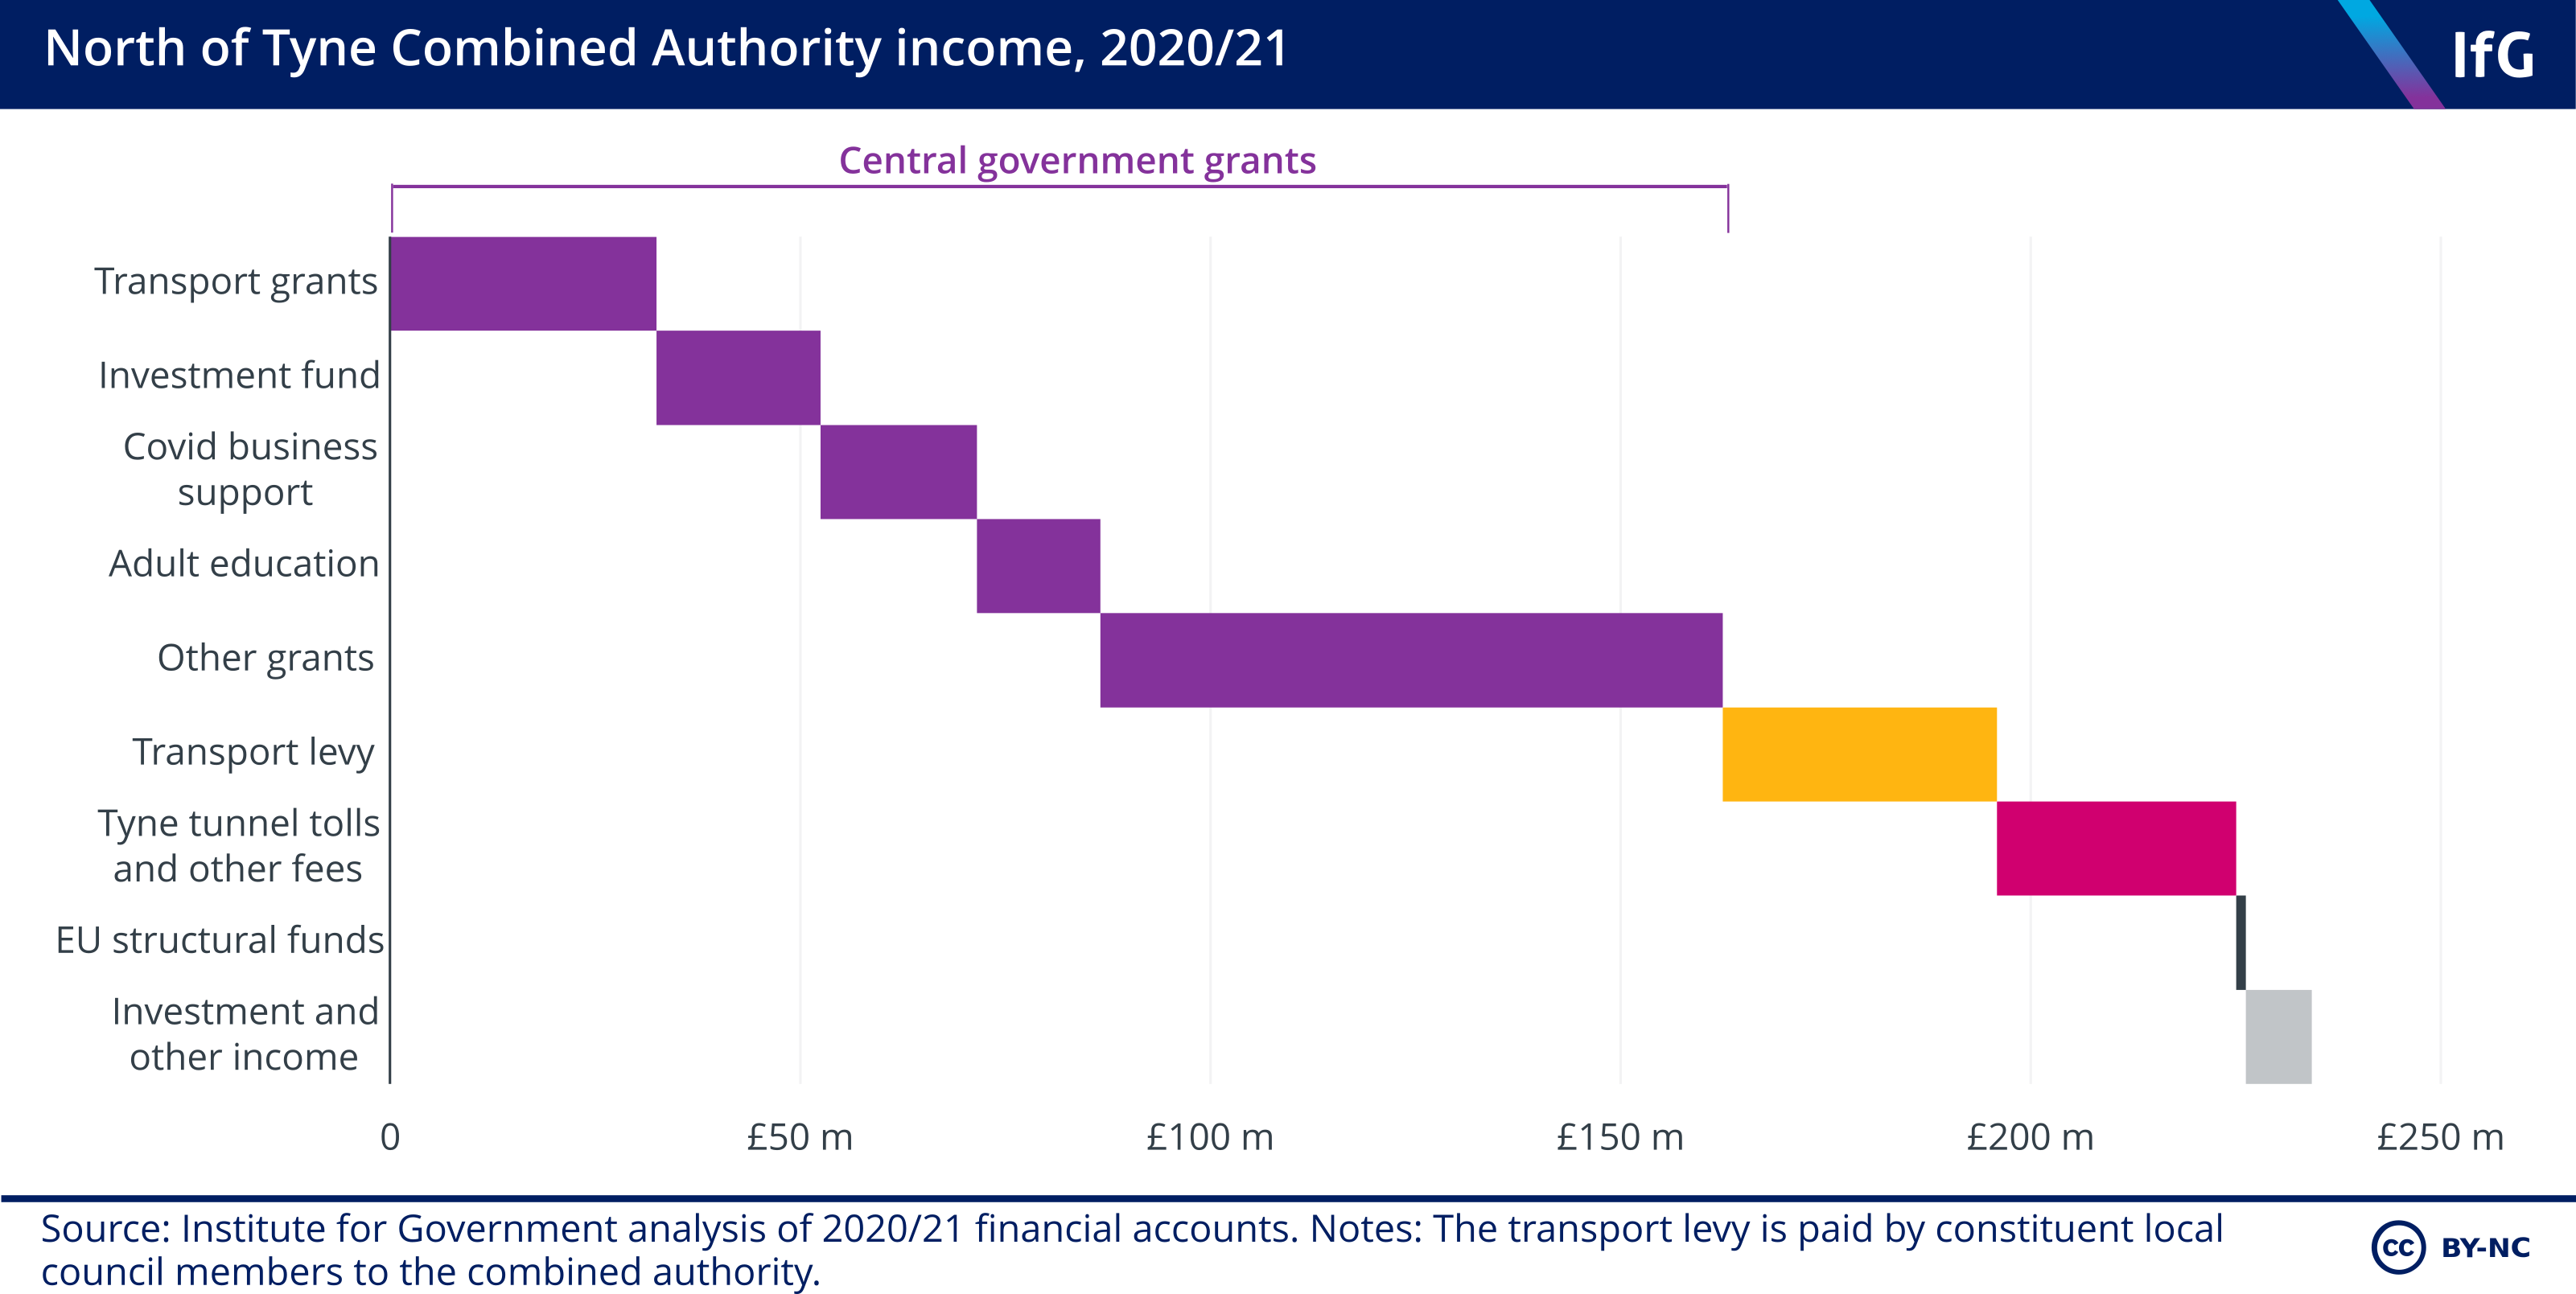 North of Tyne Combined Authority income, 2020/21